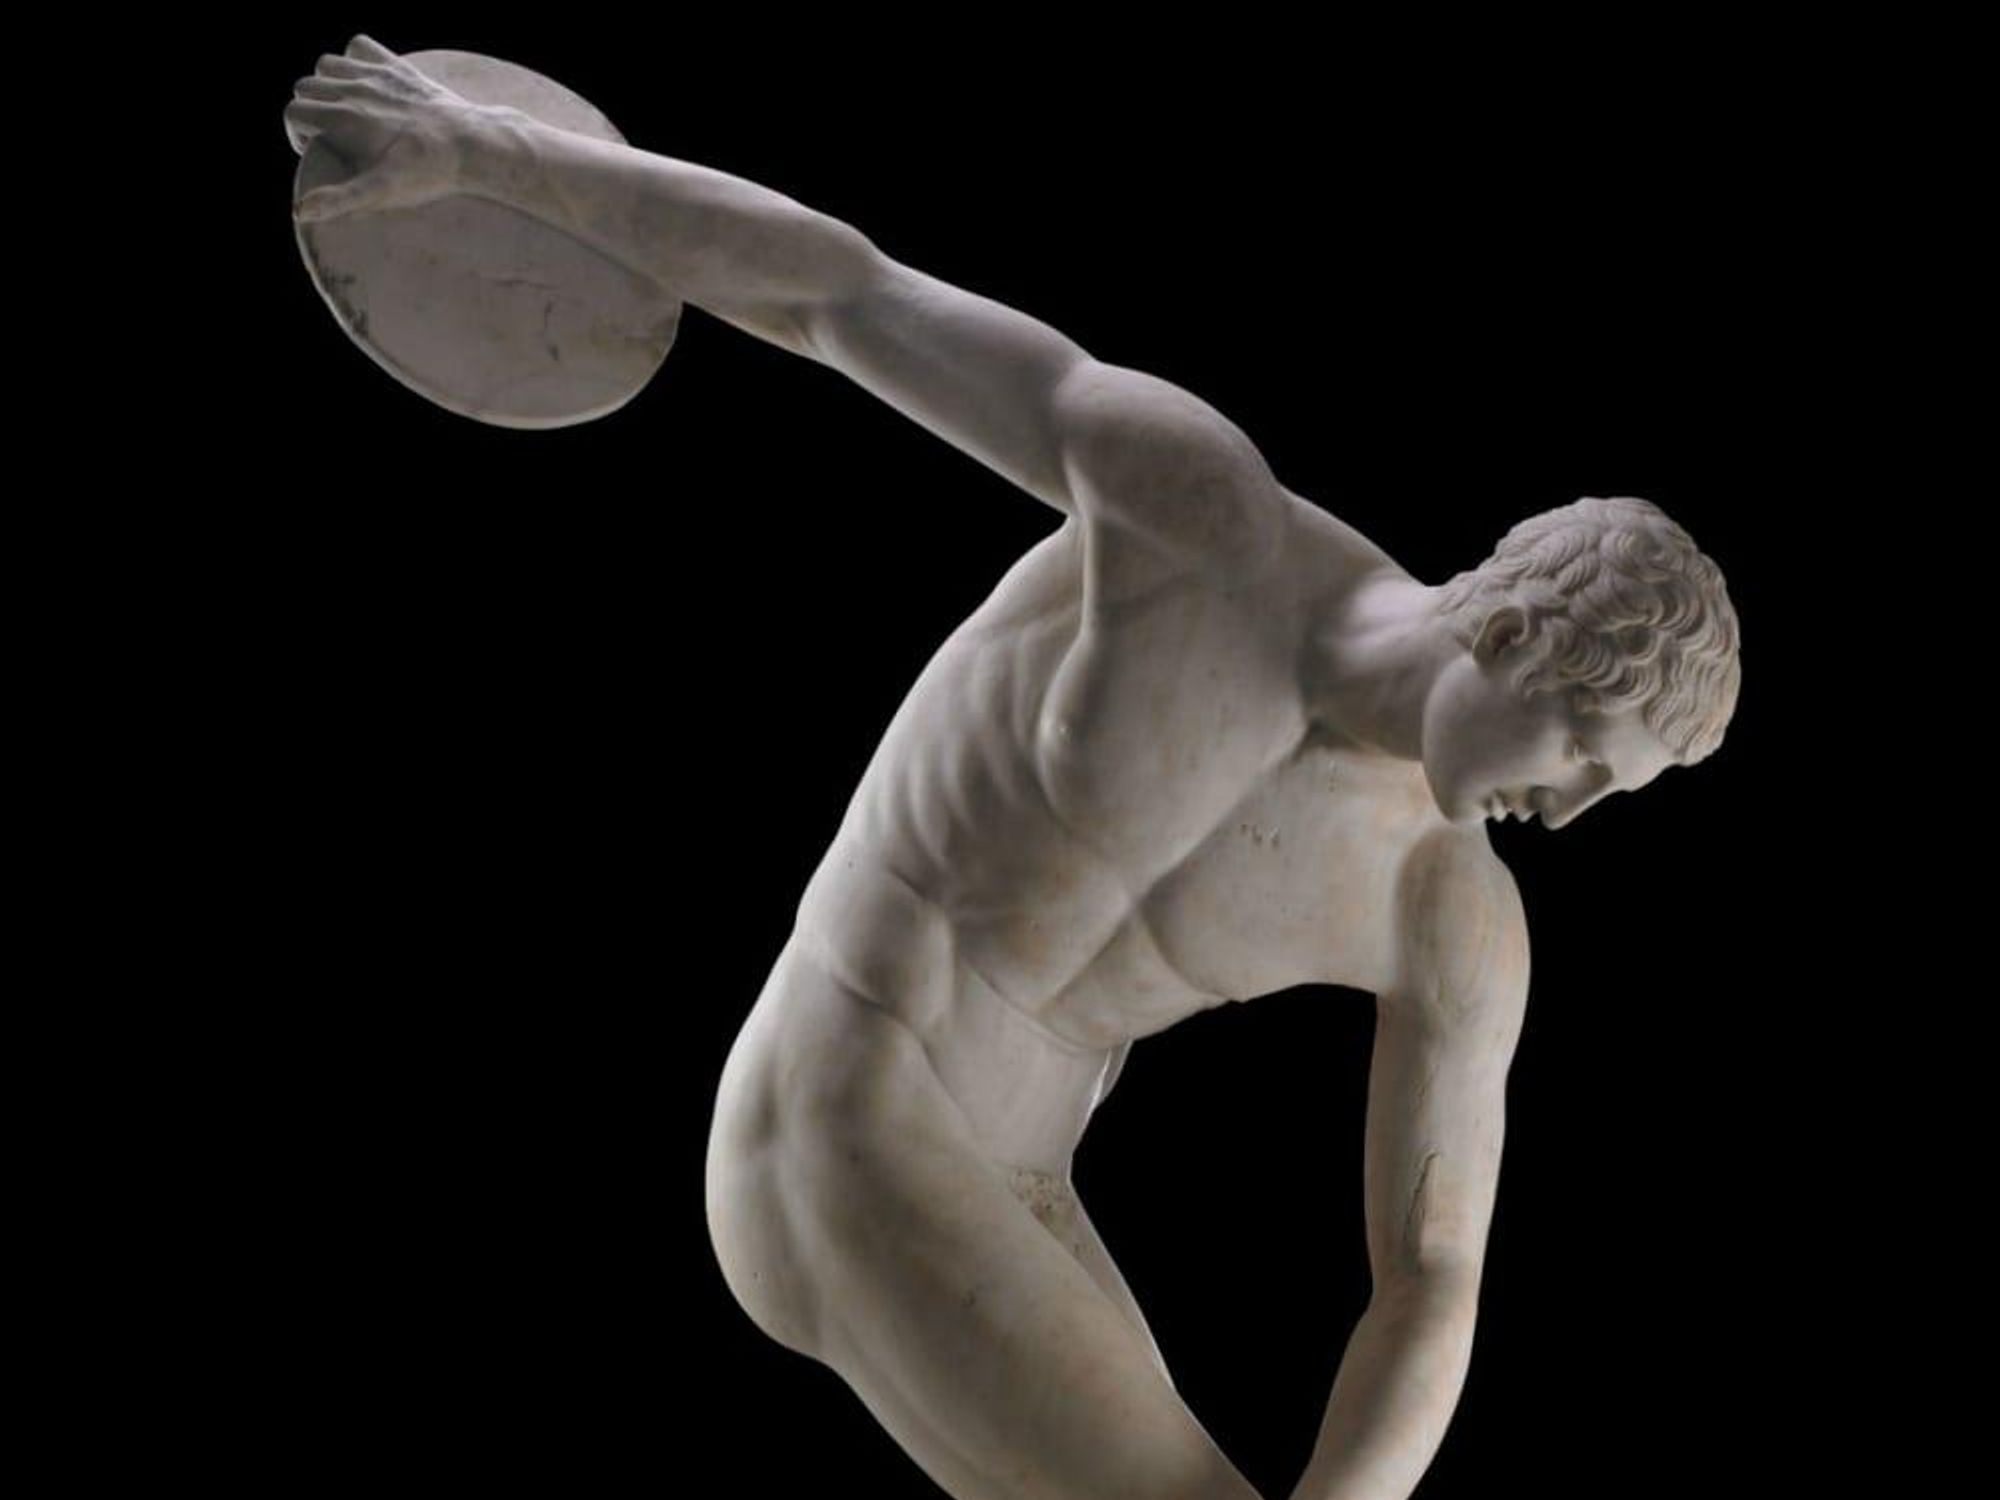 Dallas Museum of Art presents The Body Beautiful in Ancient Greece